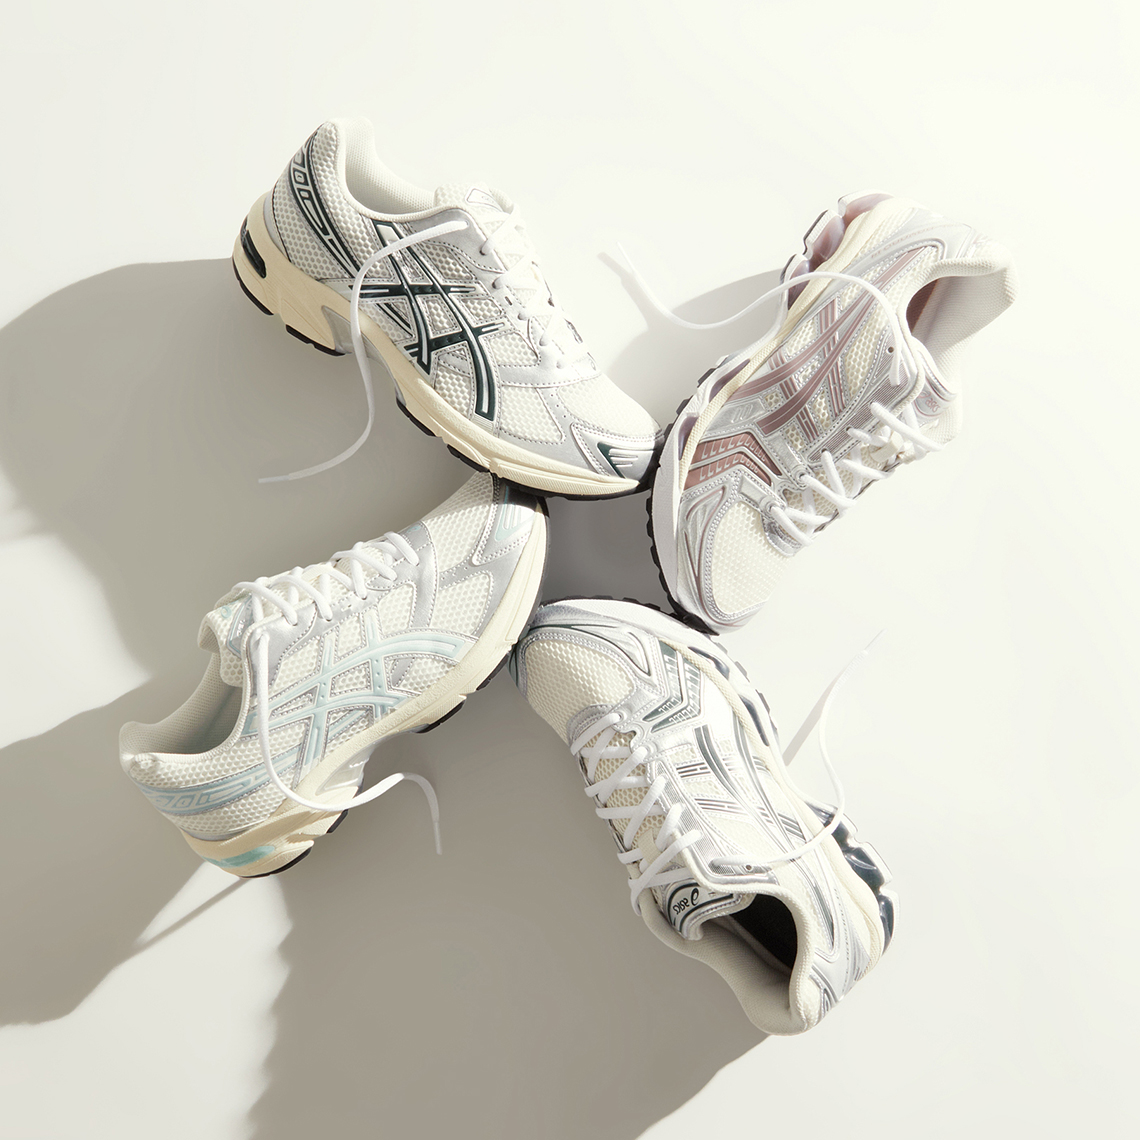 Kith Asics Vintage Tech 2023 Release Date 3